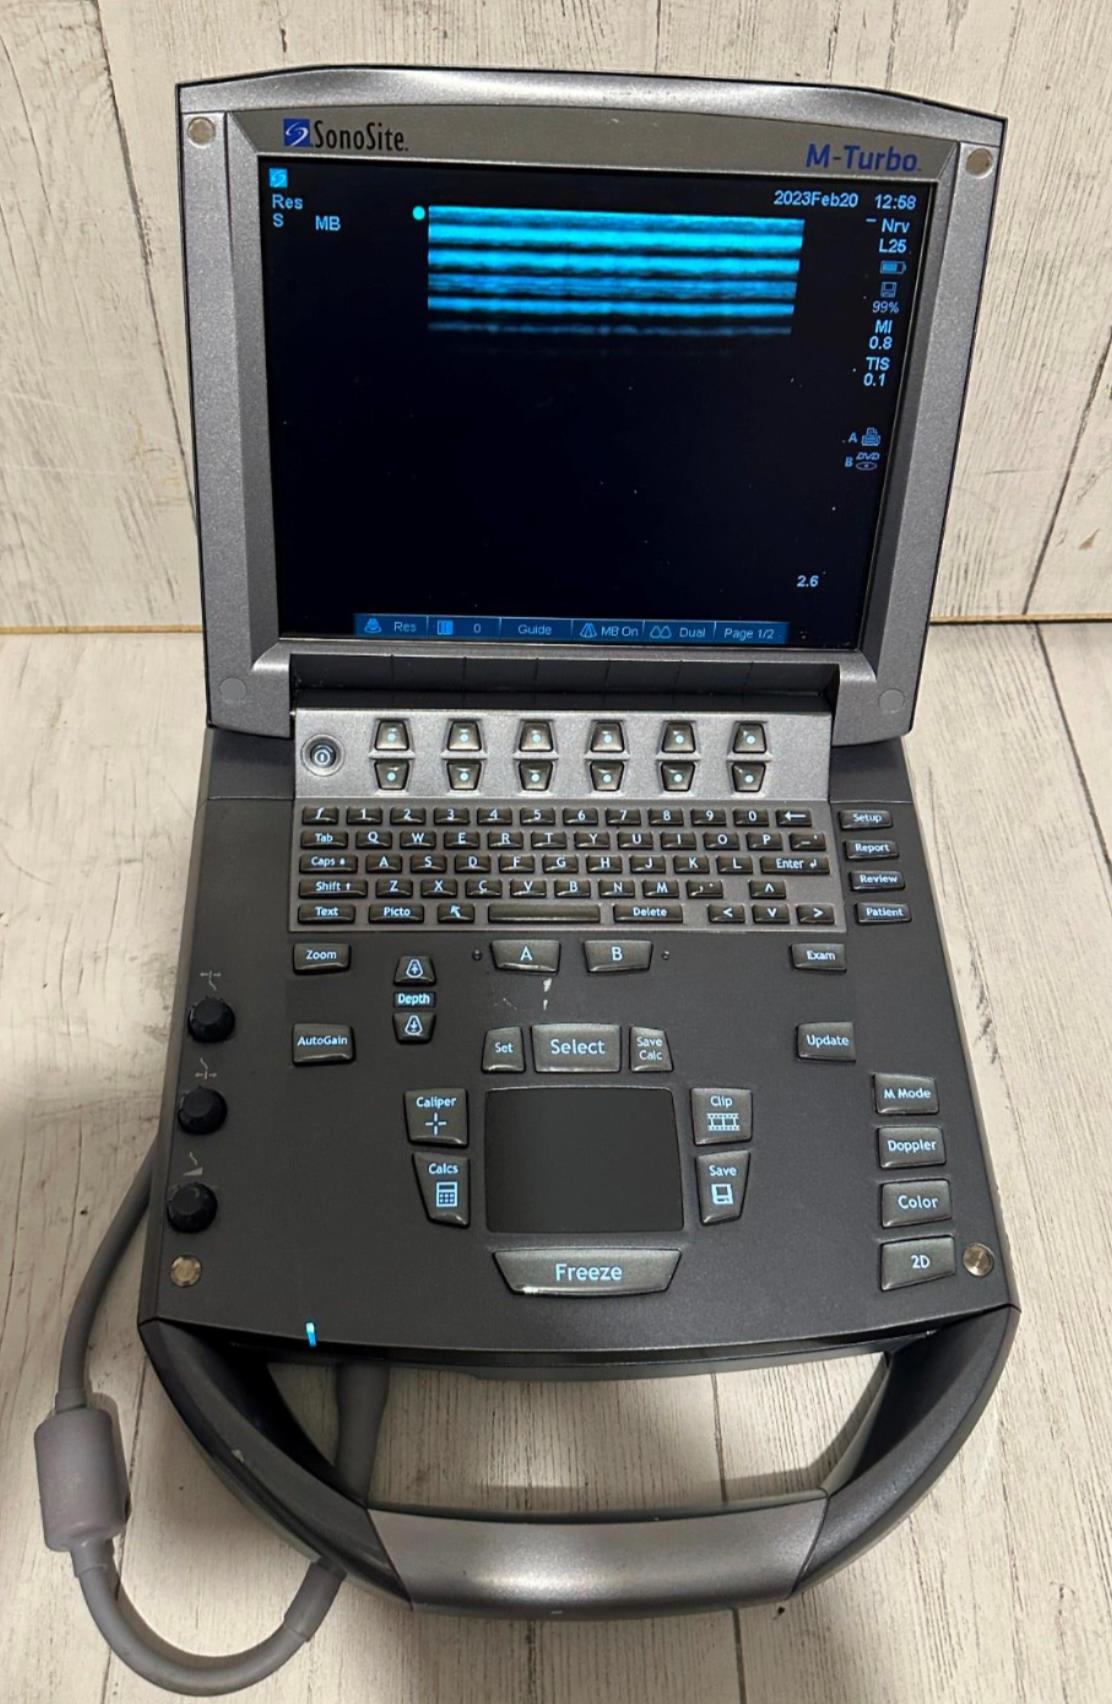 SonoSite M-Turbo Portable Ultrasound  2009 with Mini Dock Station DIAGNOSTIC ULTRASOUND MACHINES FOR SALE